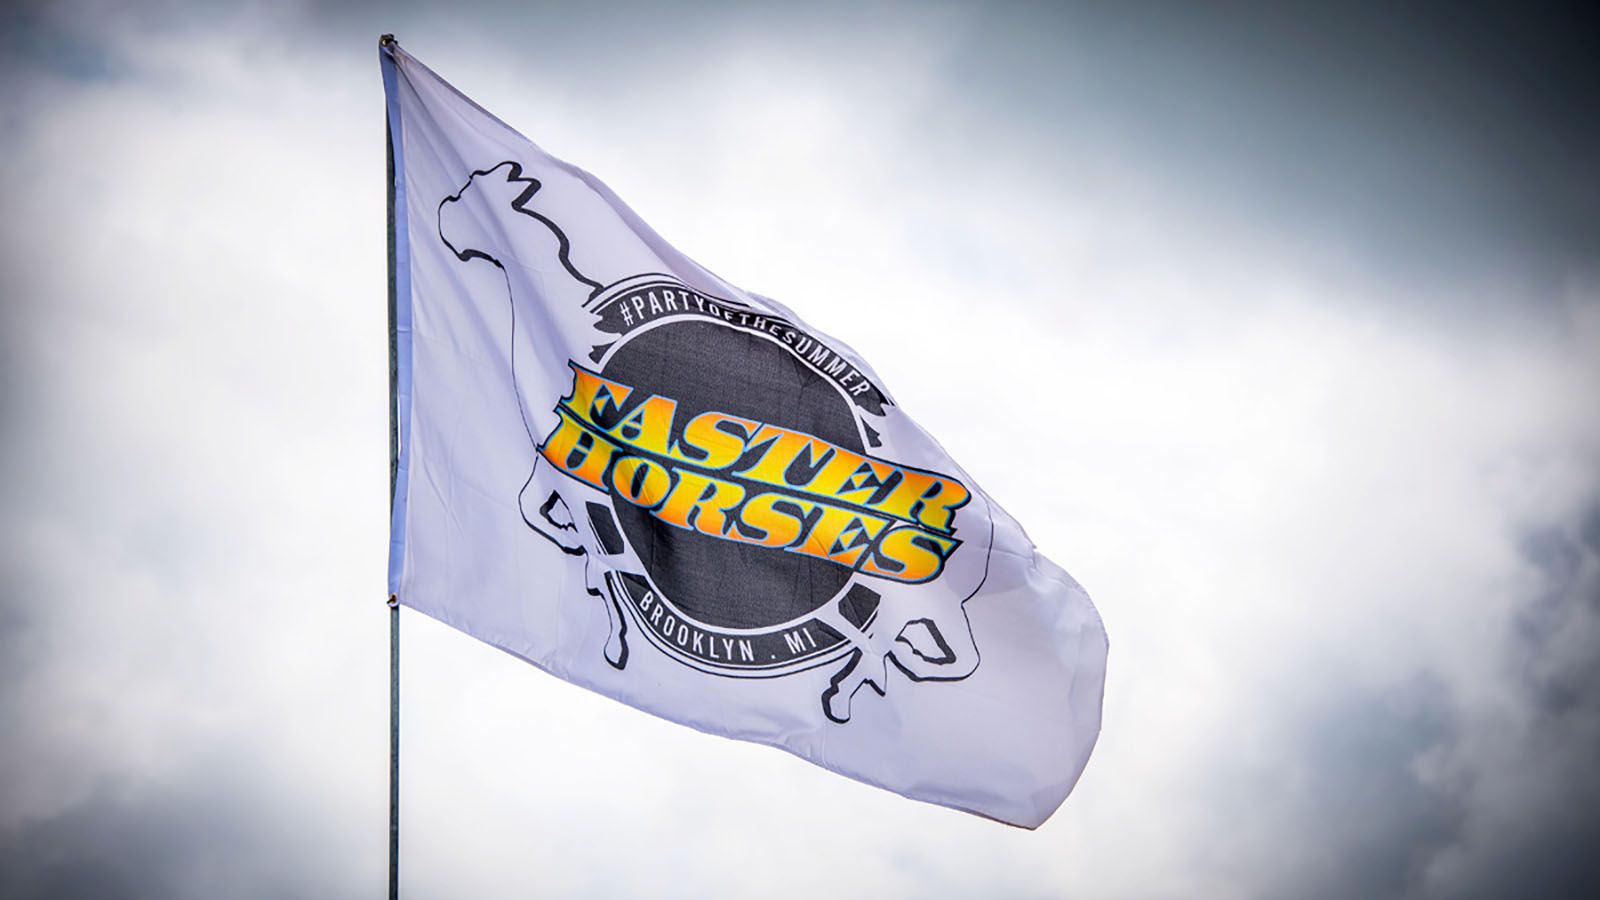 The country music Faster Horses Festival returns to Brooklyn, Michigan, on July 19-21.